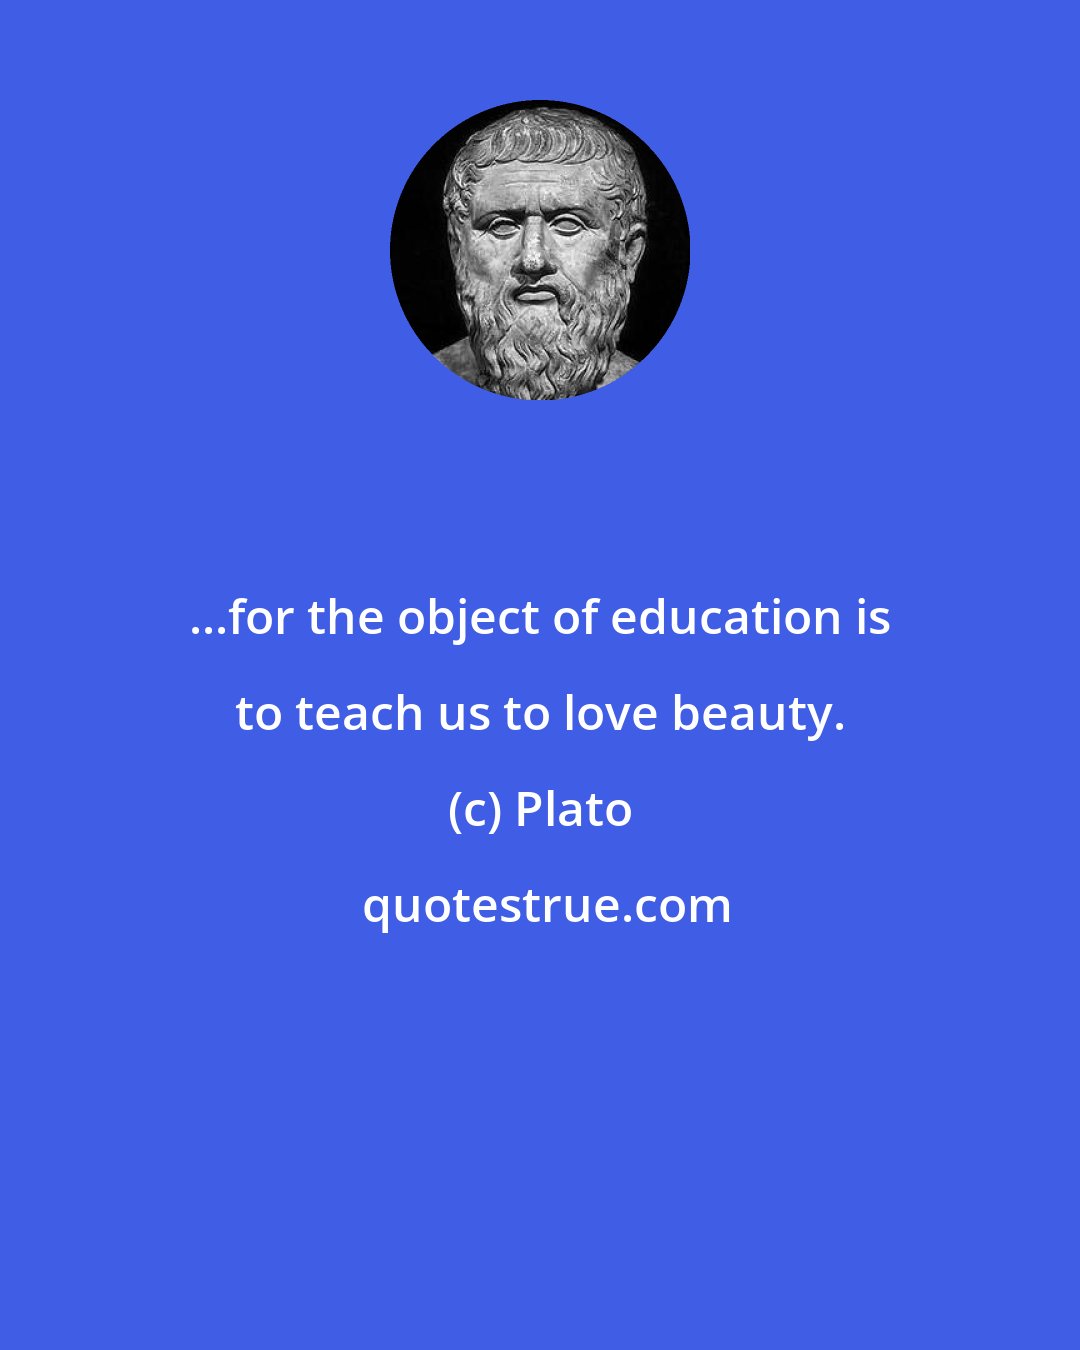 Plato: ...for the object of education is to teach us to love beauty.